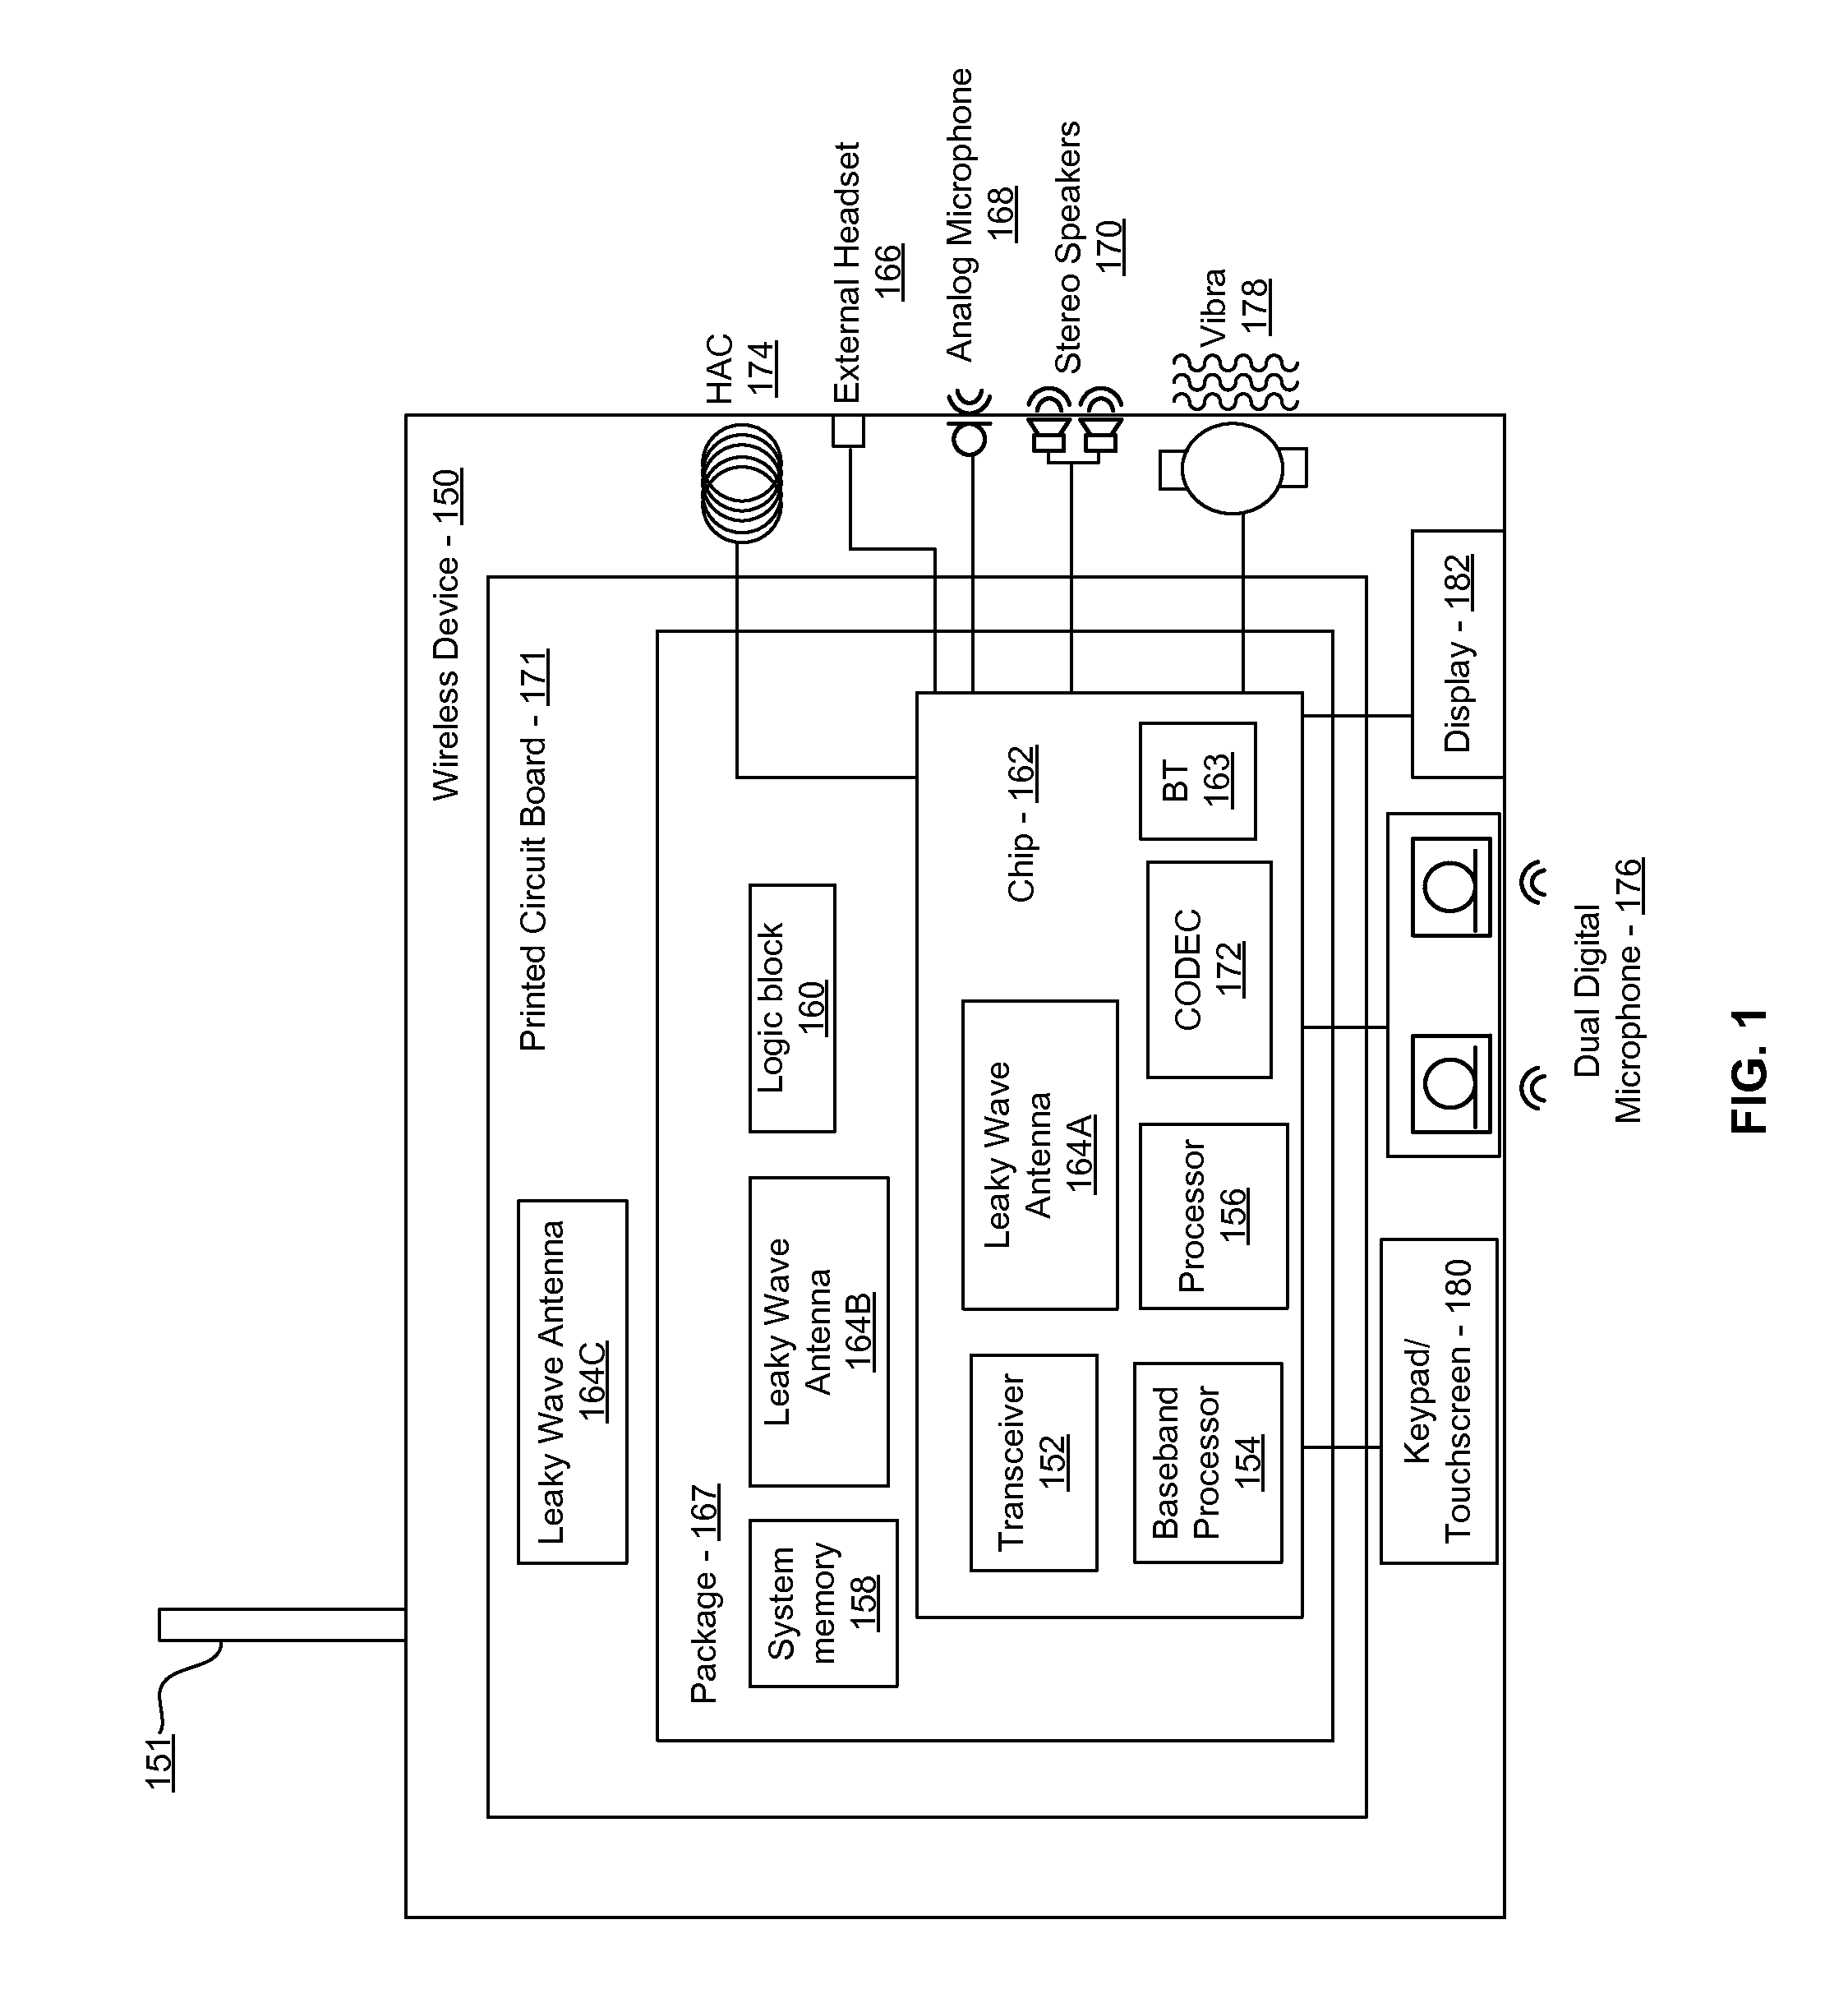 Method and System for a Low Noise Amplifier Utilizing a Leaky Wave Antenna